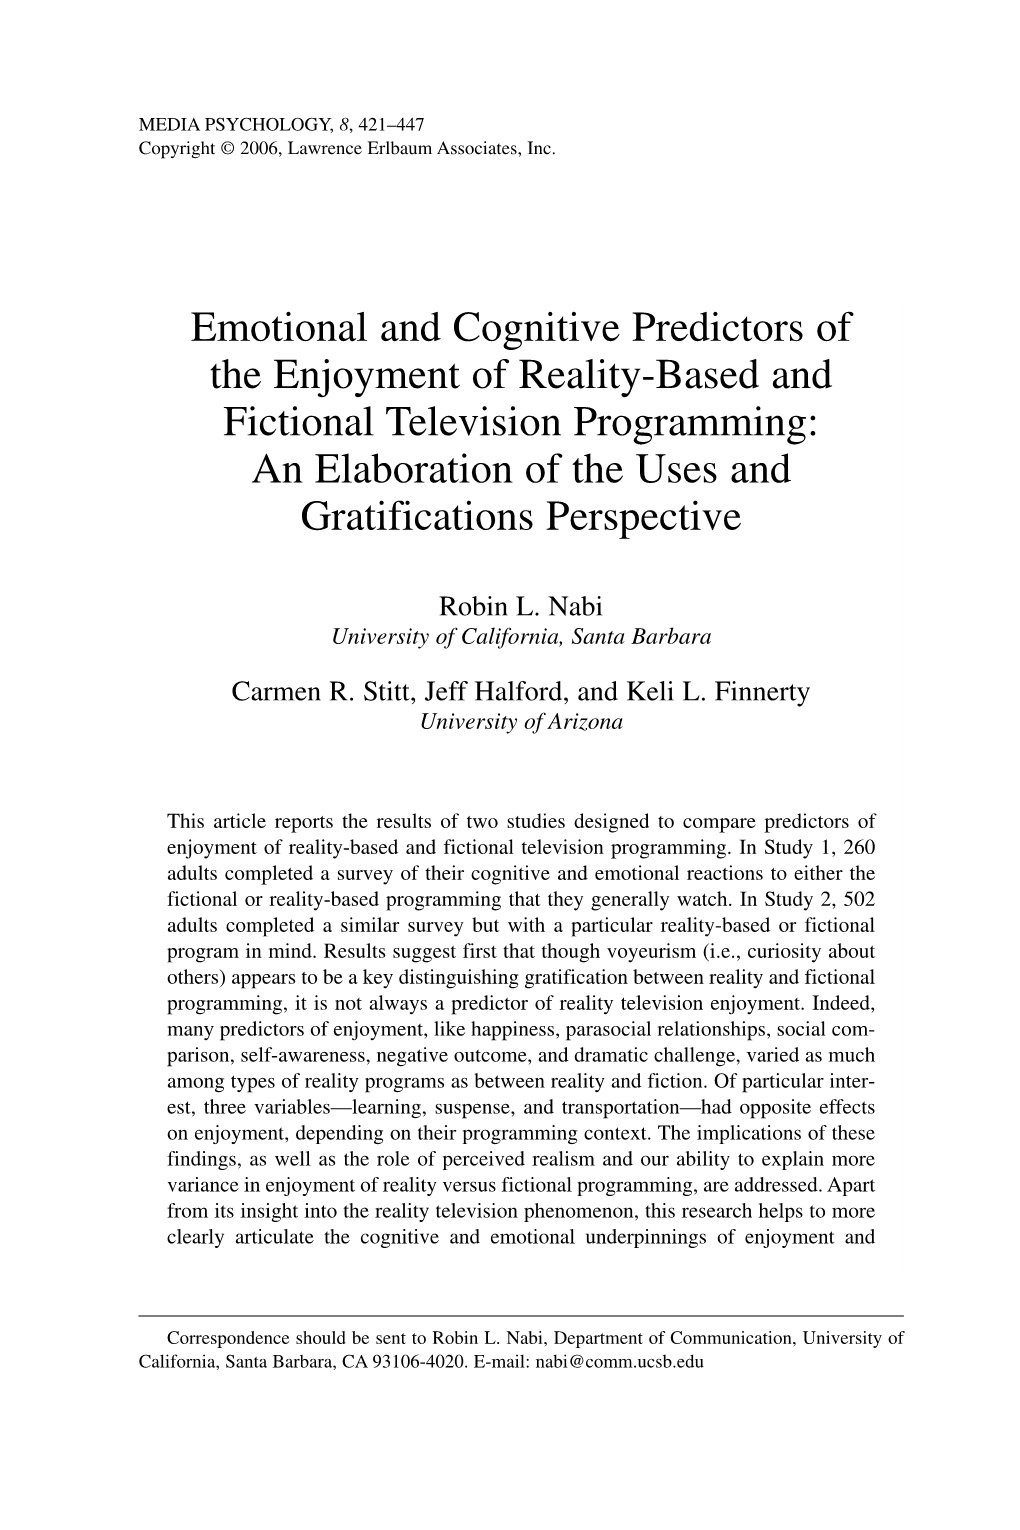 Emotional and Cognitive Predictors of the Enjoyment of Reality-Based and Fictional Television Programming: an Elaboration of the Uses and Gratifications Perspective